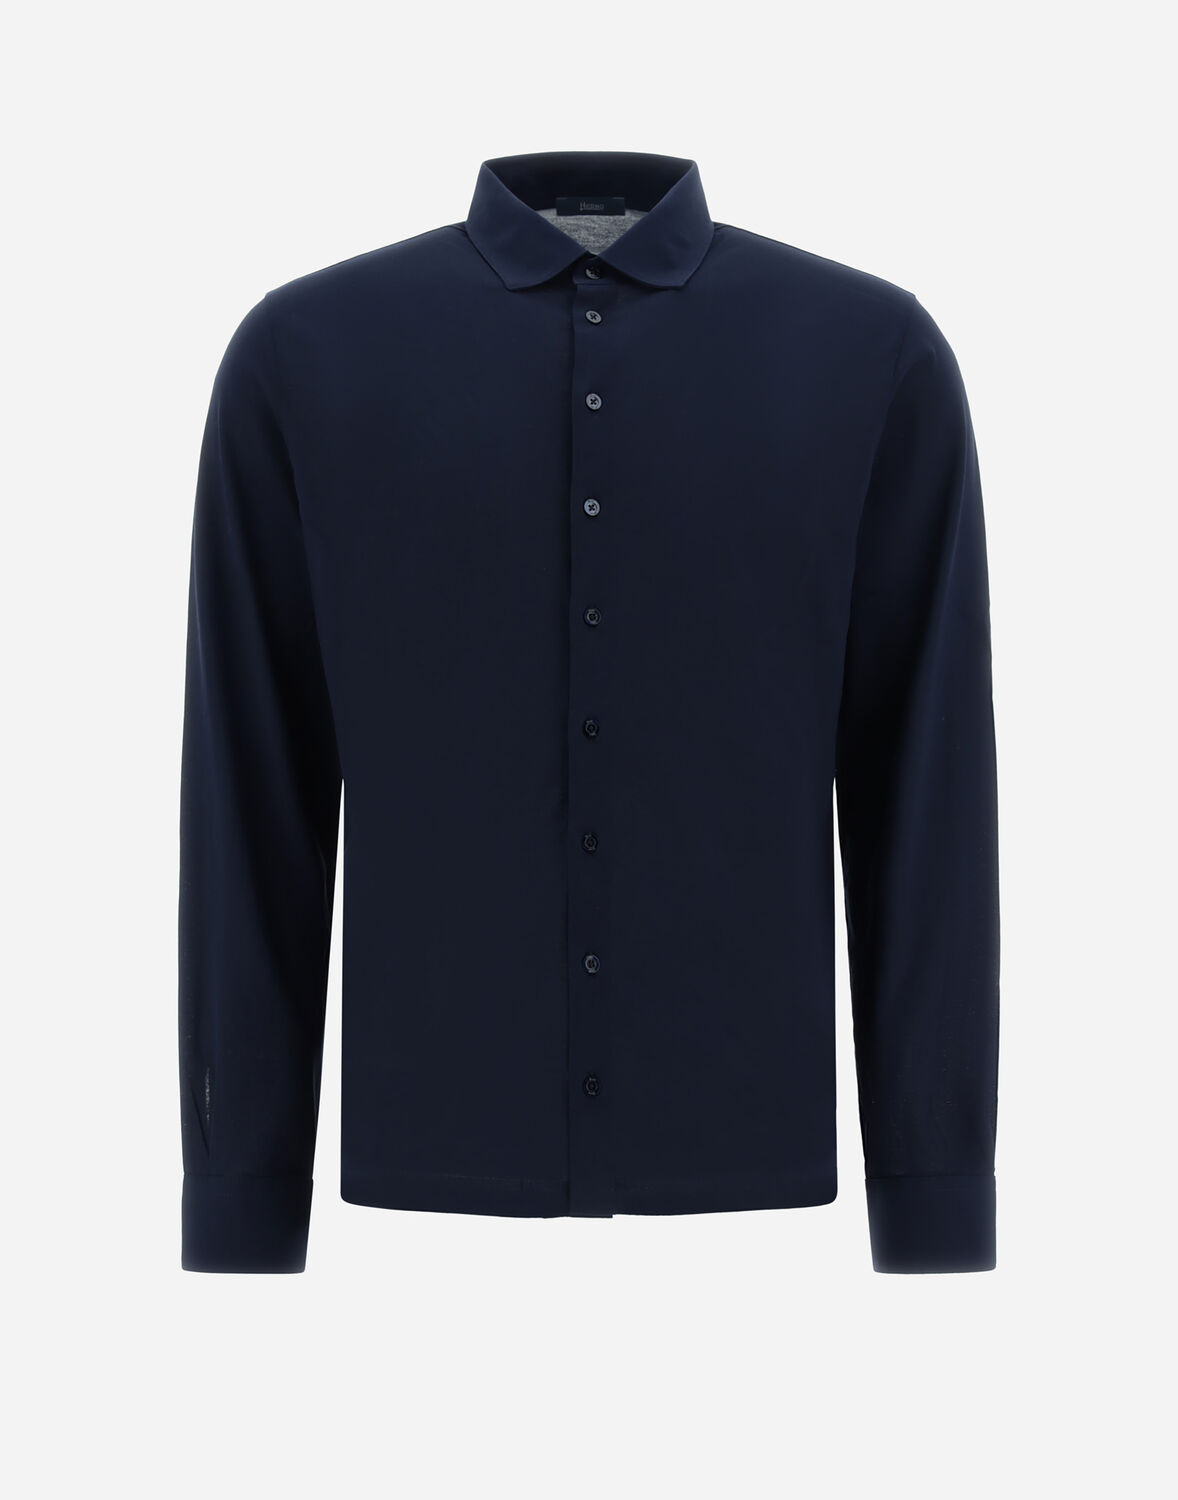 Herno Shirt In Crepe Jersey In Navy Blue